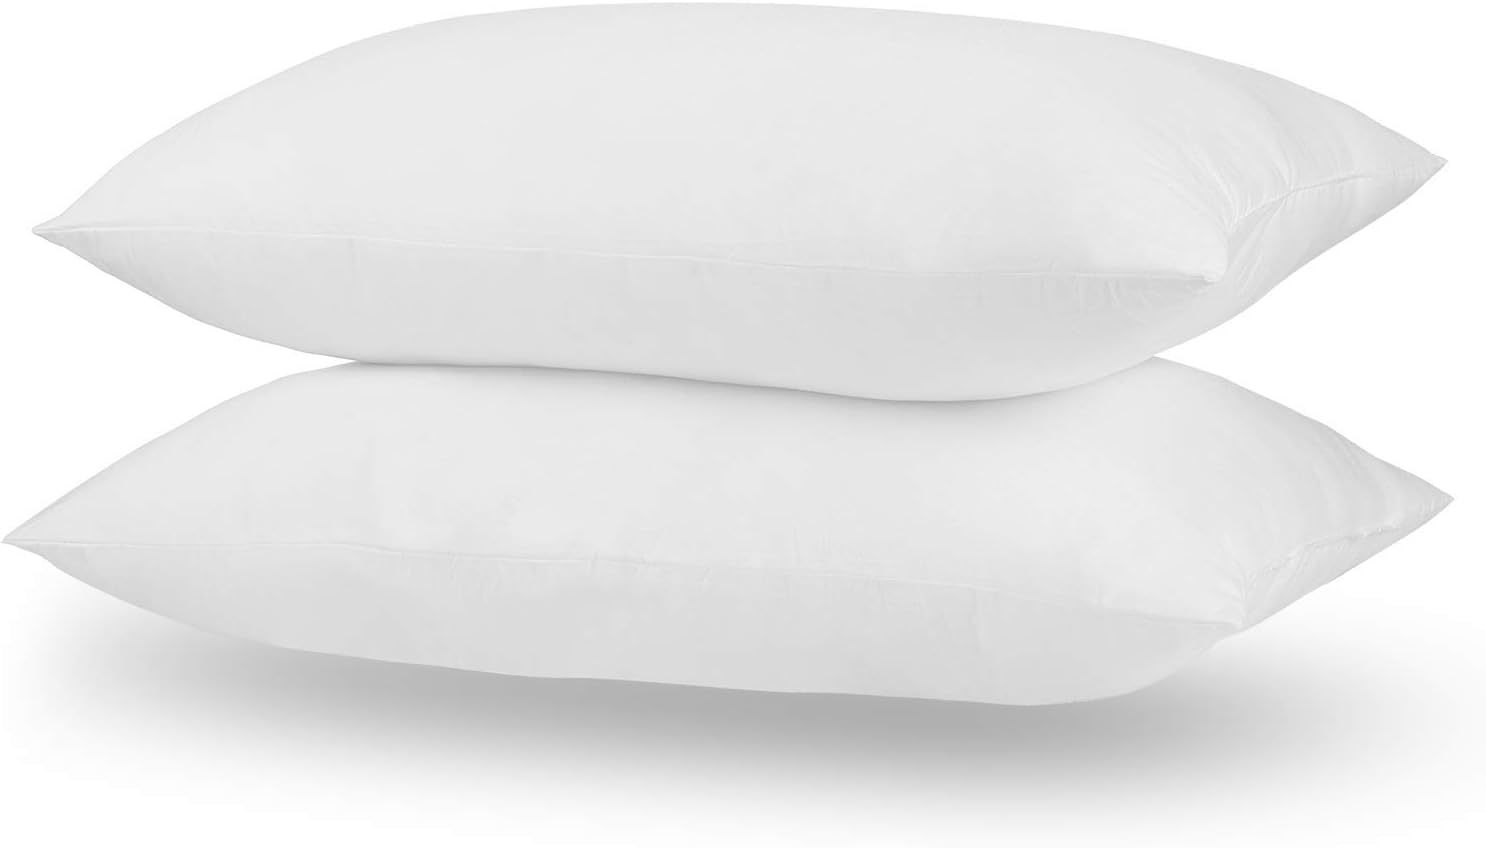 Bed Pillows 2 Pack Hotel Collection Luxury Soft Inserts for Sleeping Breathable  - $46.66